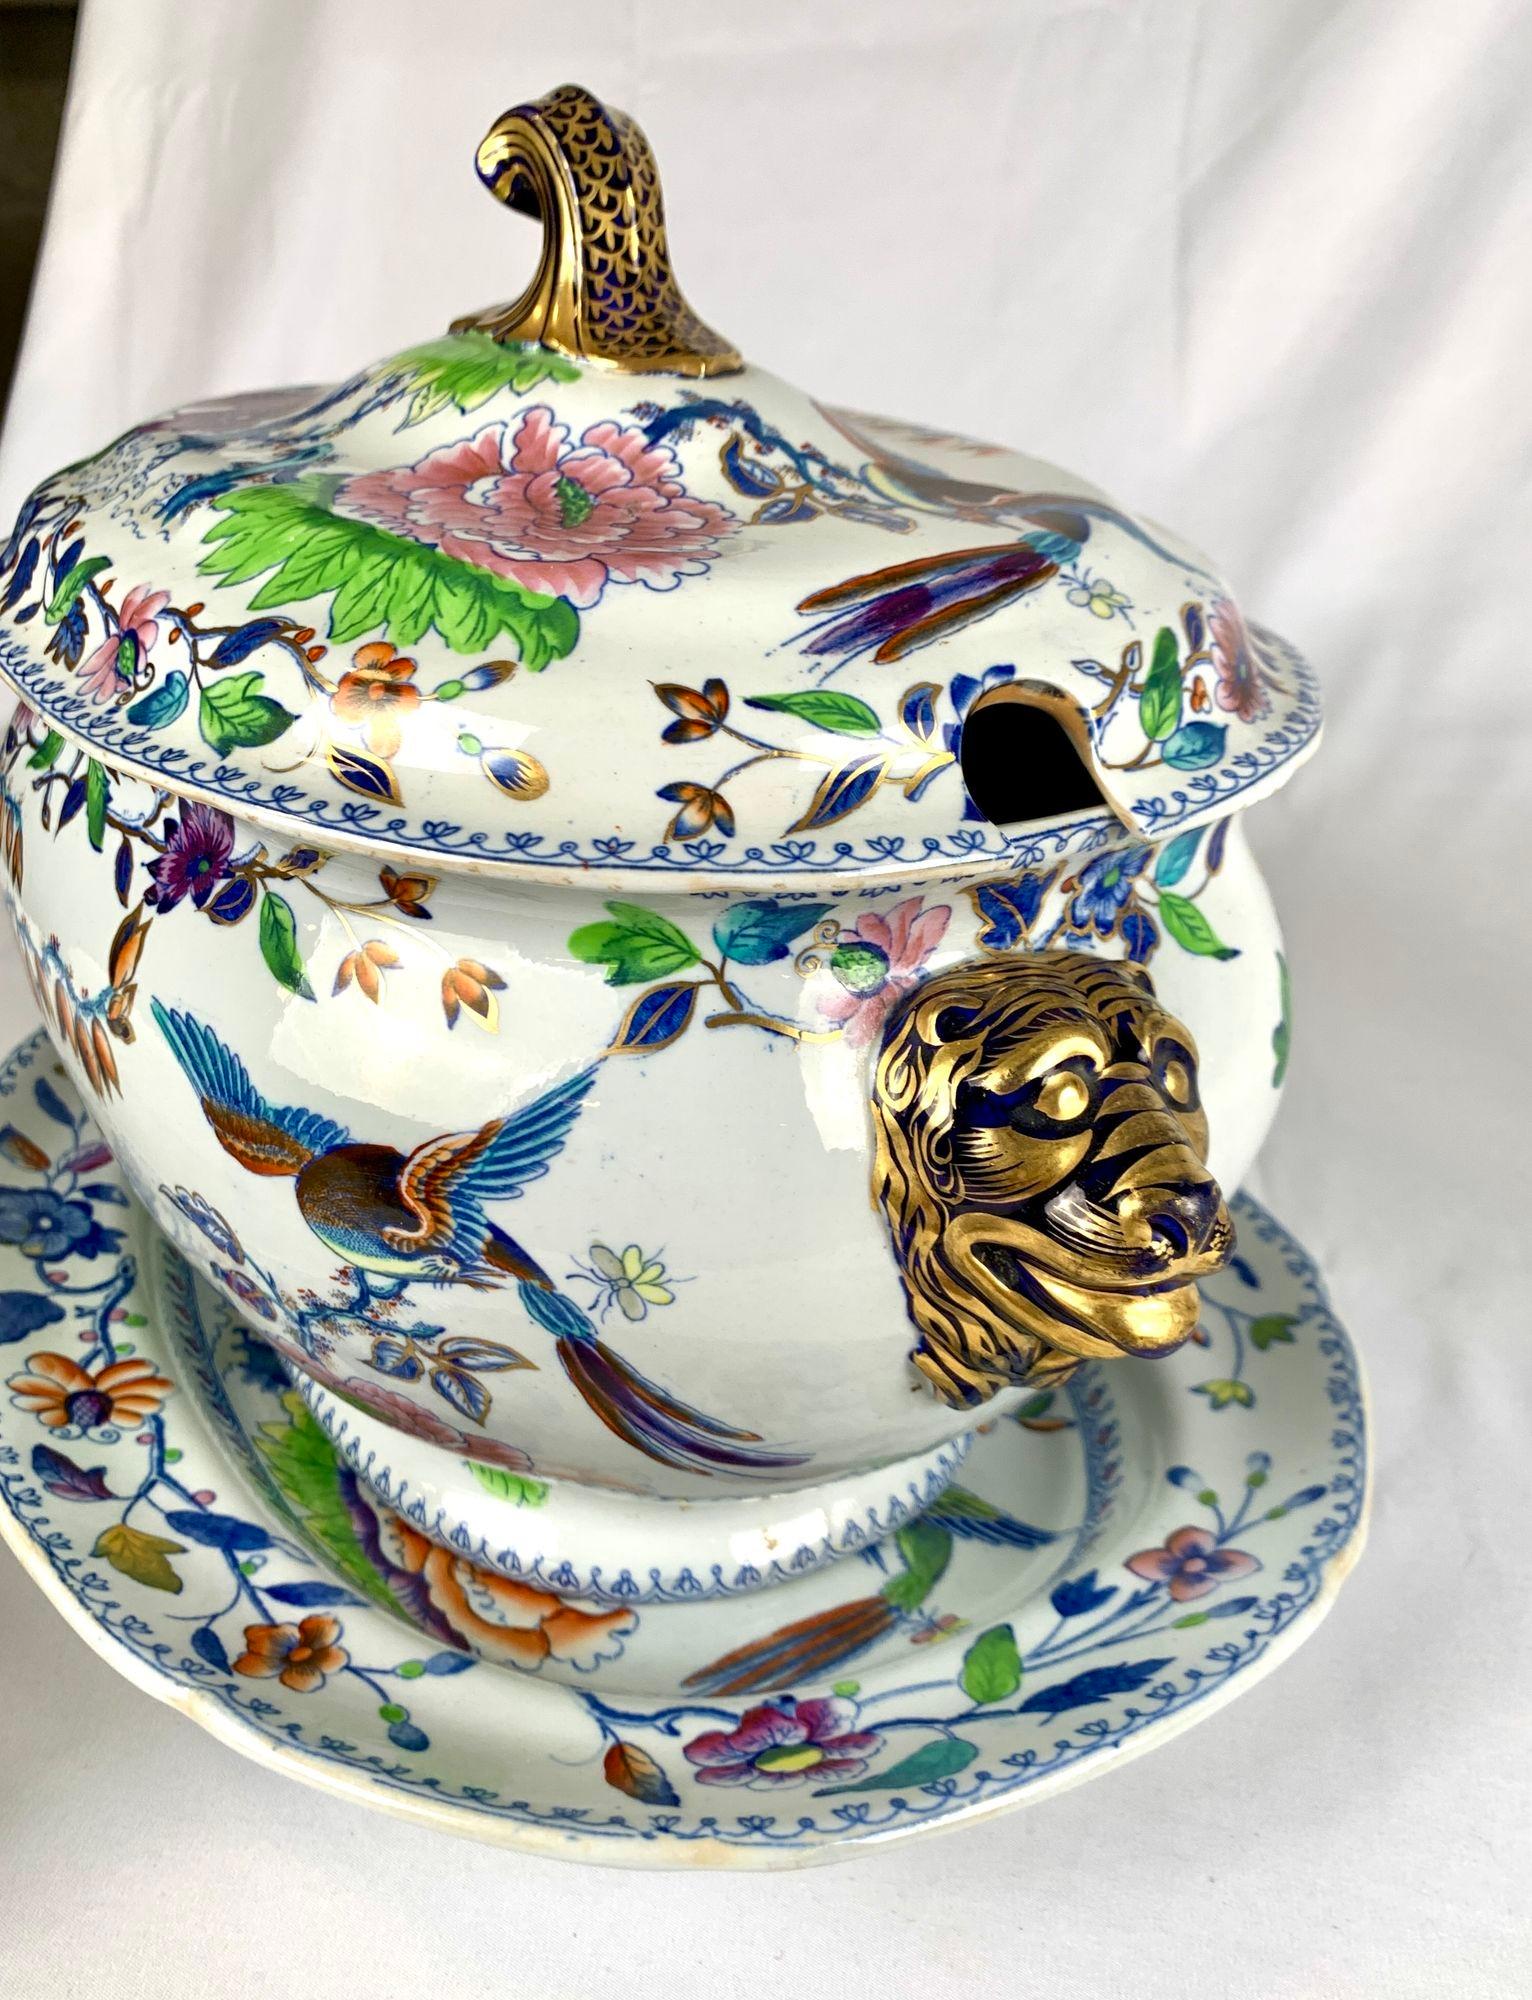 Large Soup Tureen Flying Bird Pattern Made in England Circa 1815 by Davenport 5